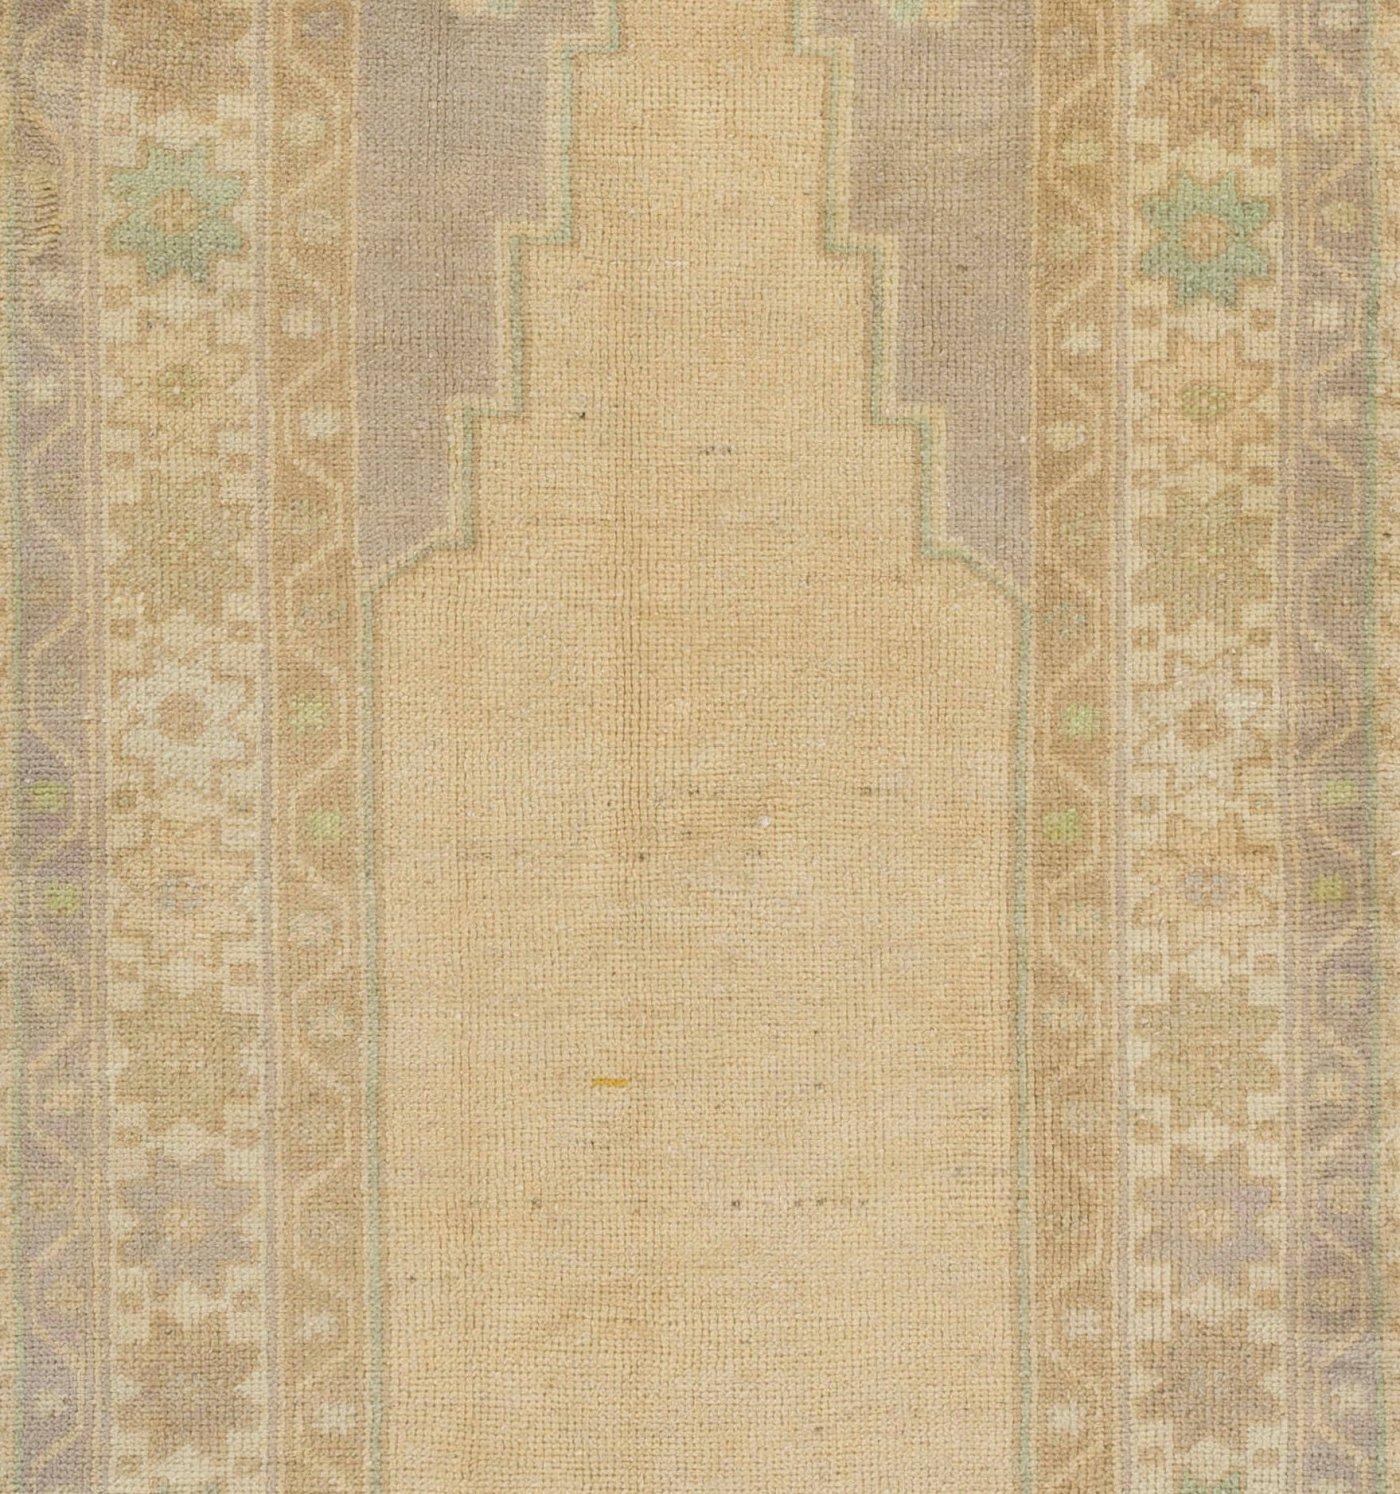 Hand-Knotted 2.8x6.6 Ft Faded Turkish Prayer Rug, Vintage Handmade Accent Rug. Beige Door Mat For Sale